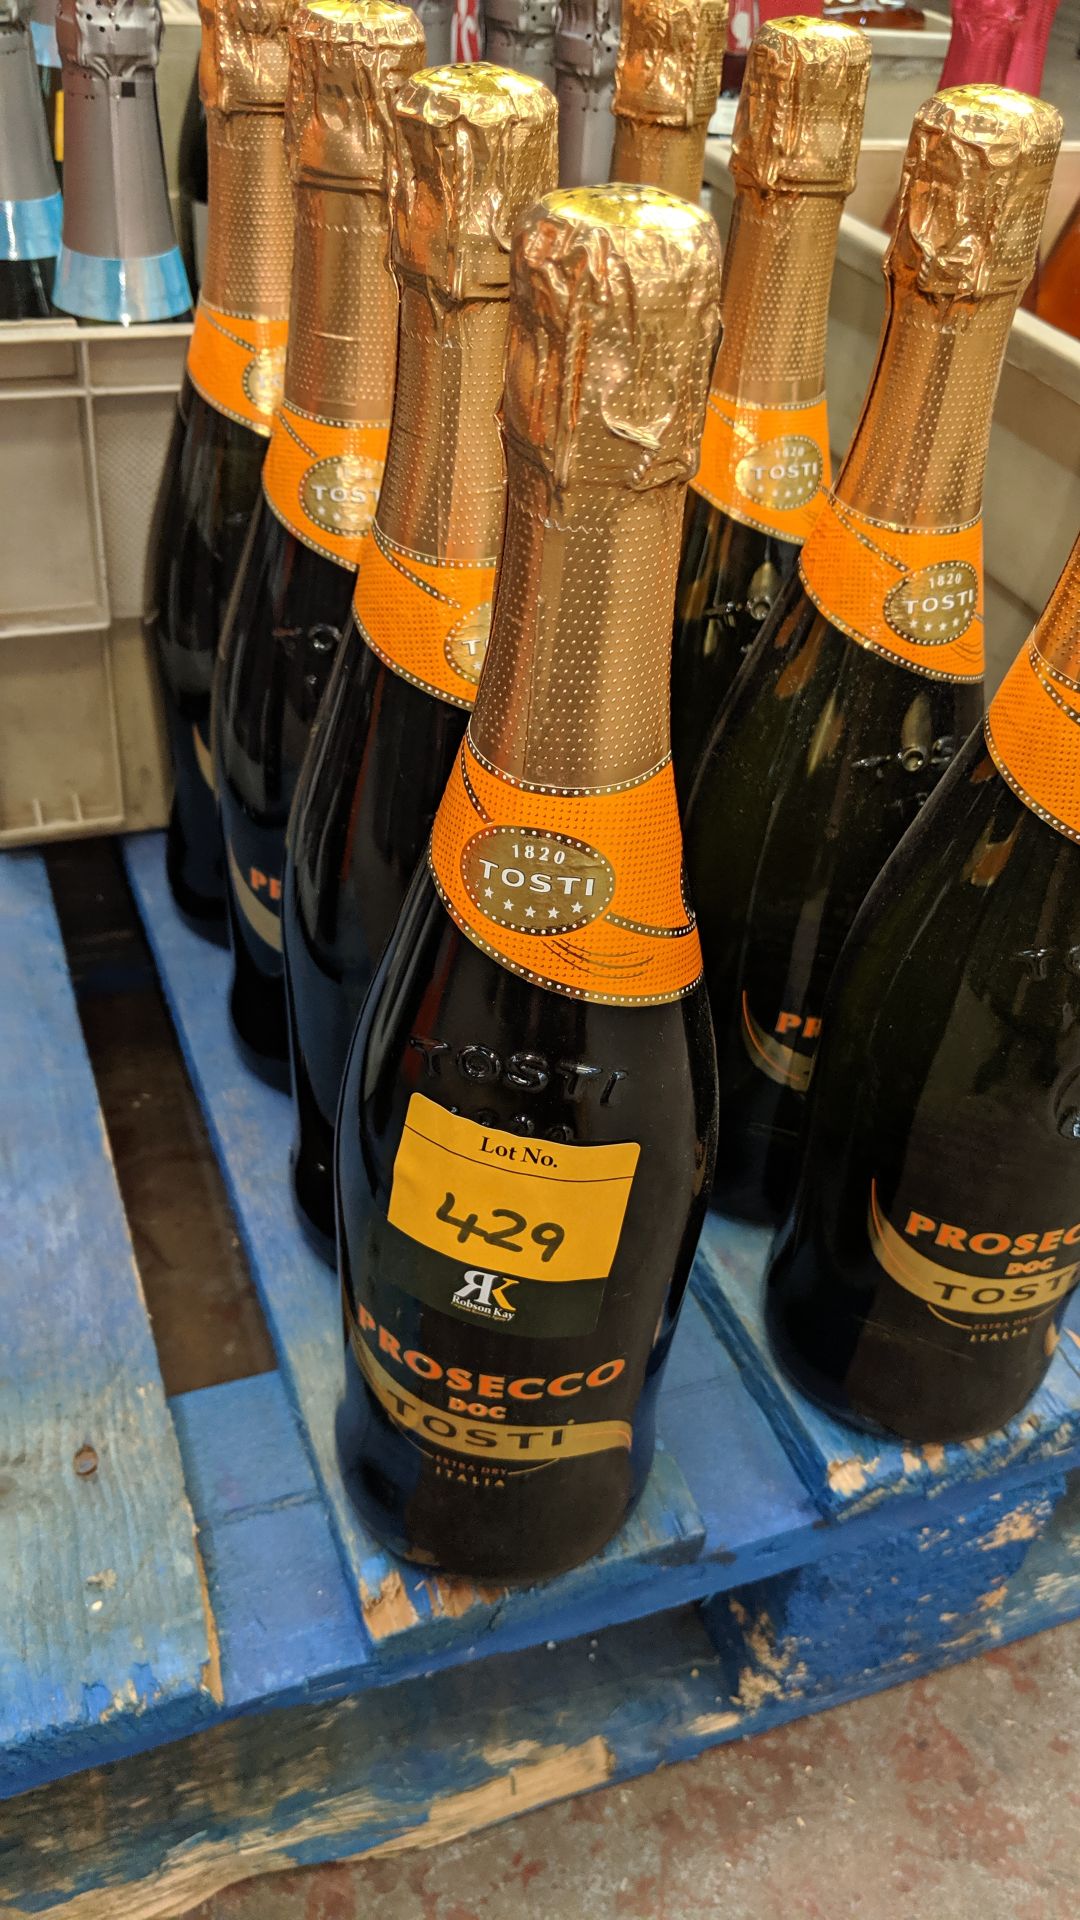 8 off 75cl bottles of Tosti extra dry DOC Italian prosecco sold under AWRS number XQAW00000101017 - Image 2 of 2